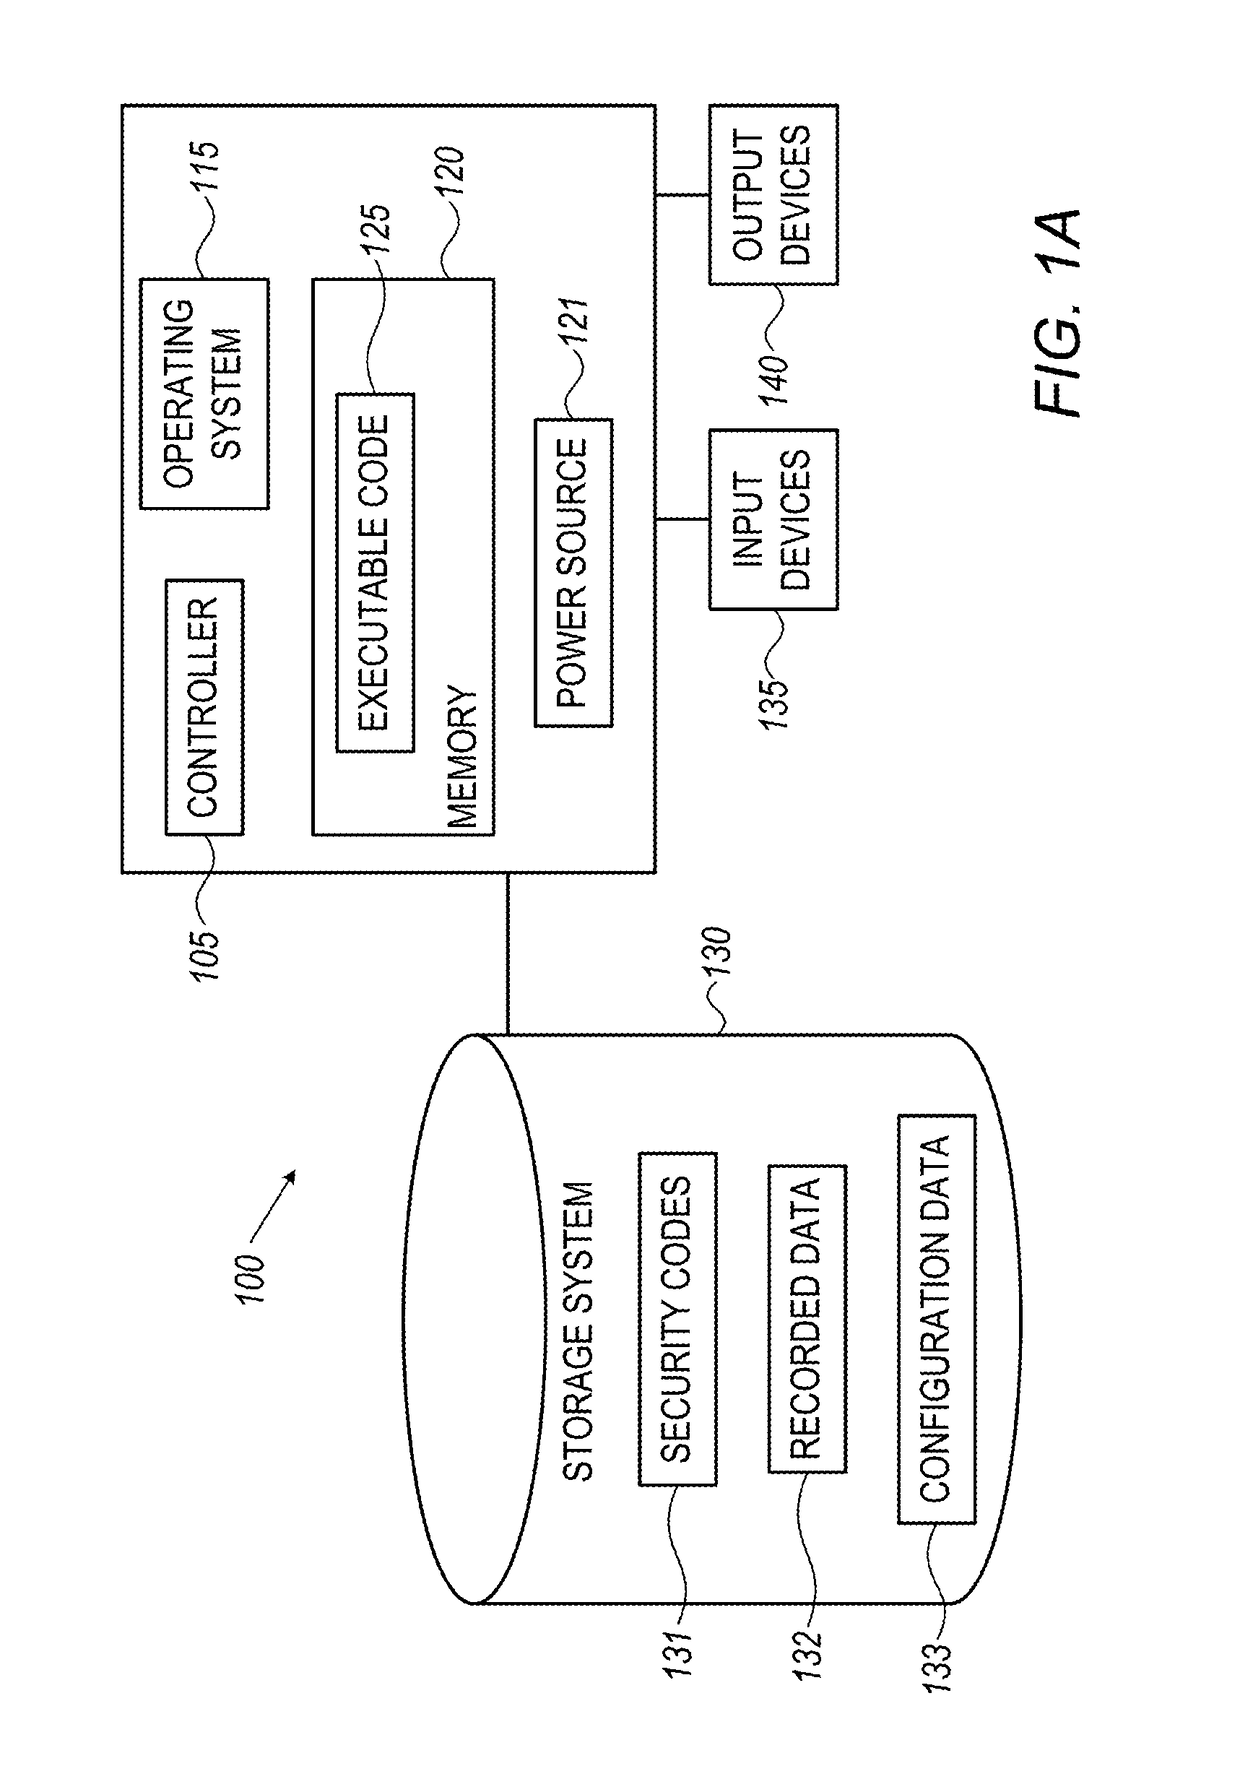 System and method for controlling access to an in-vehicle communication network